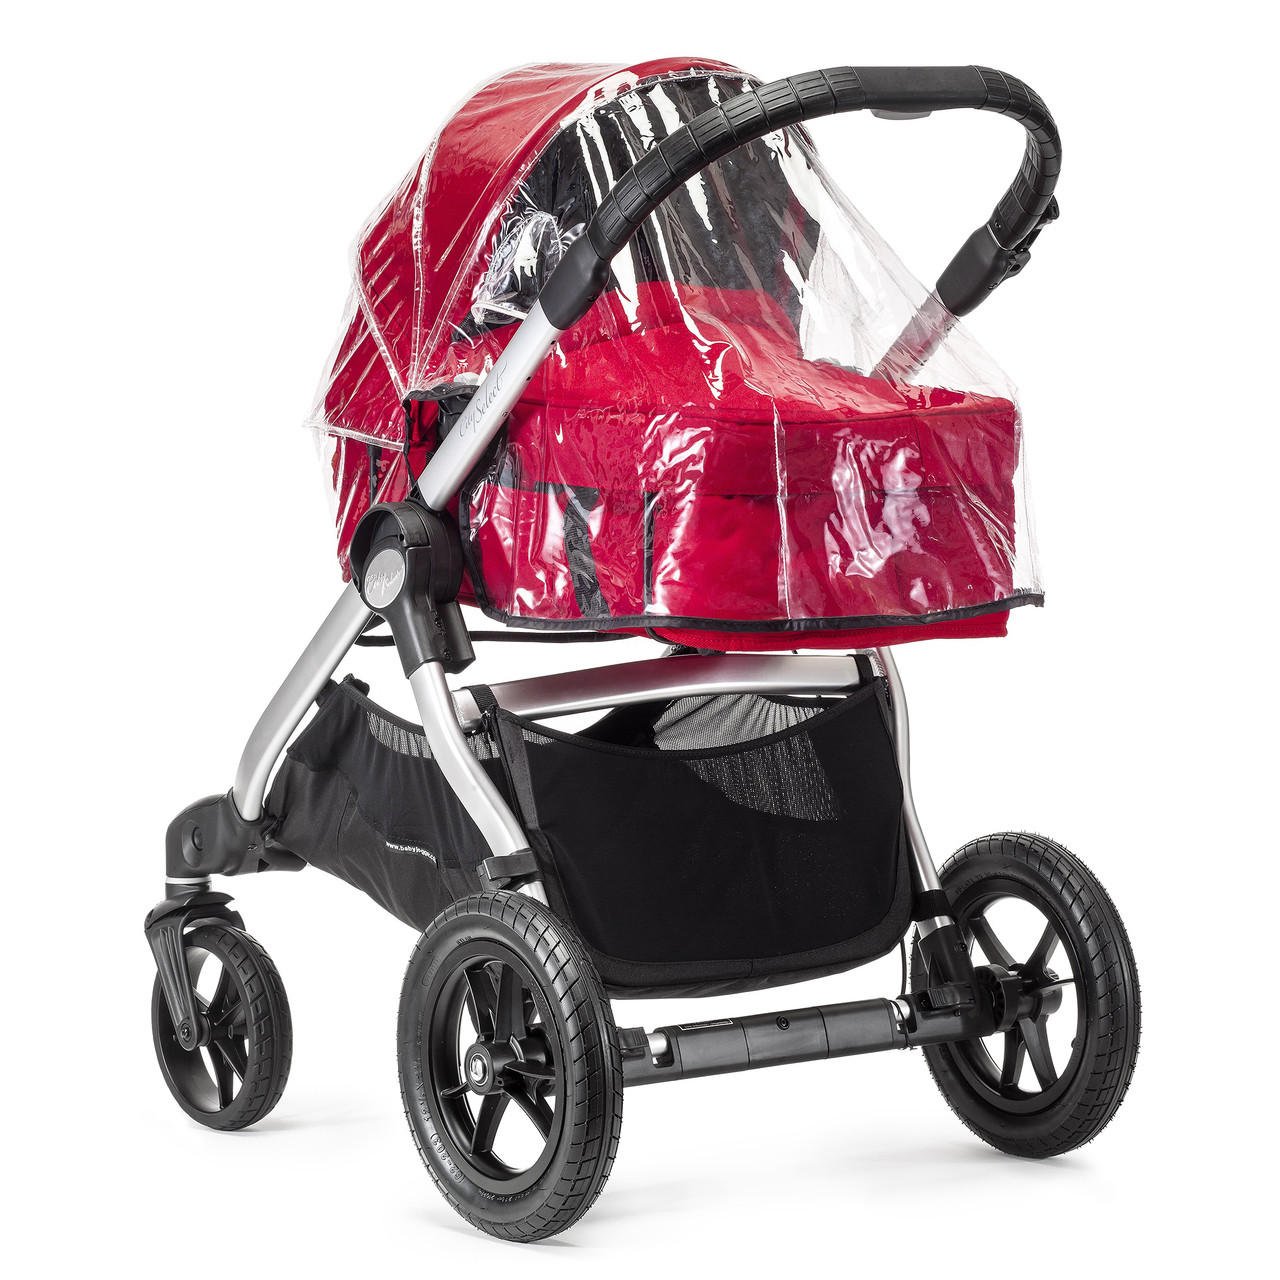 baby jogger city mini gt cover